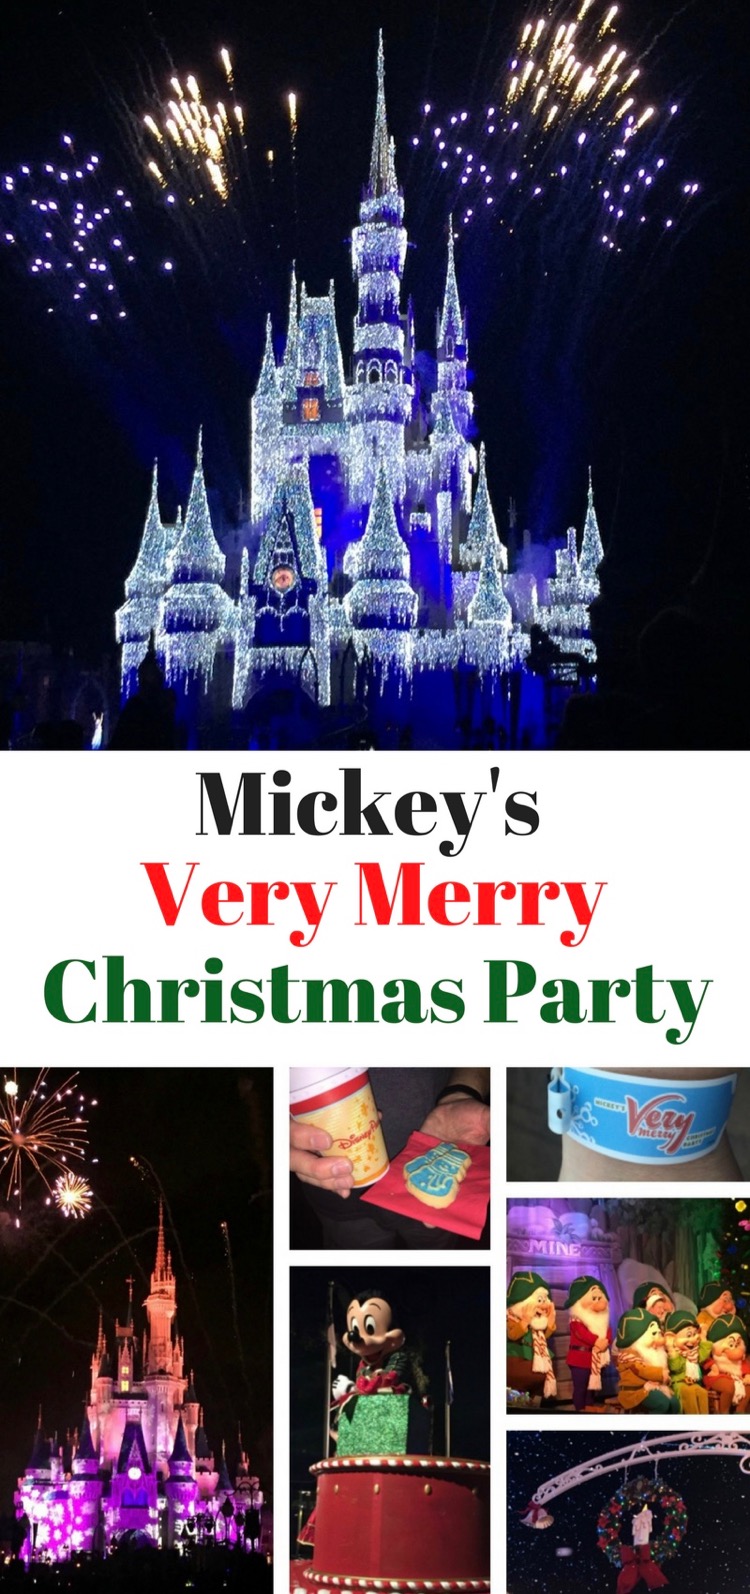 Mickey's Very Merry Christmas Party at Disney World Gather Lemons